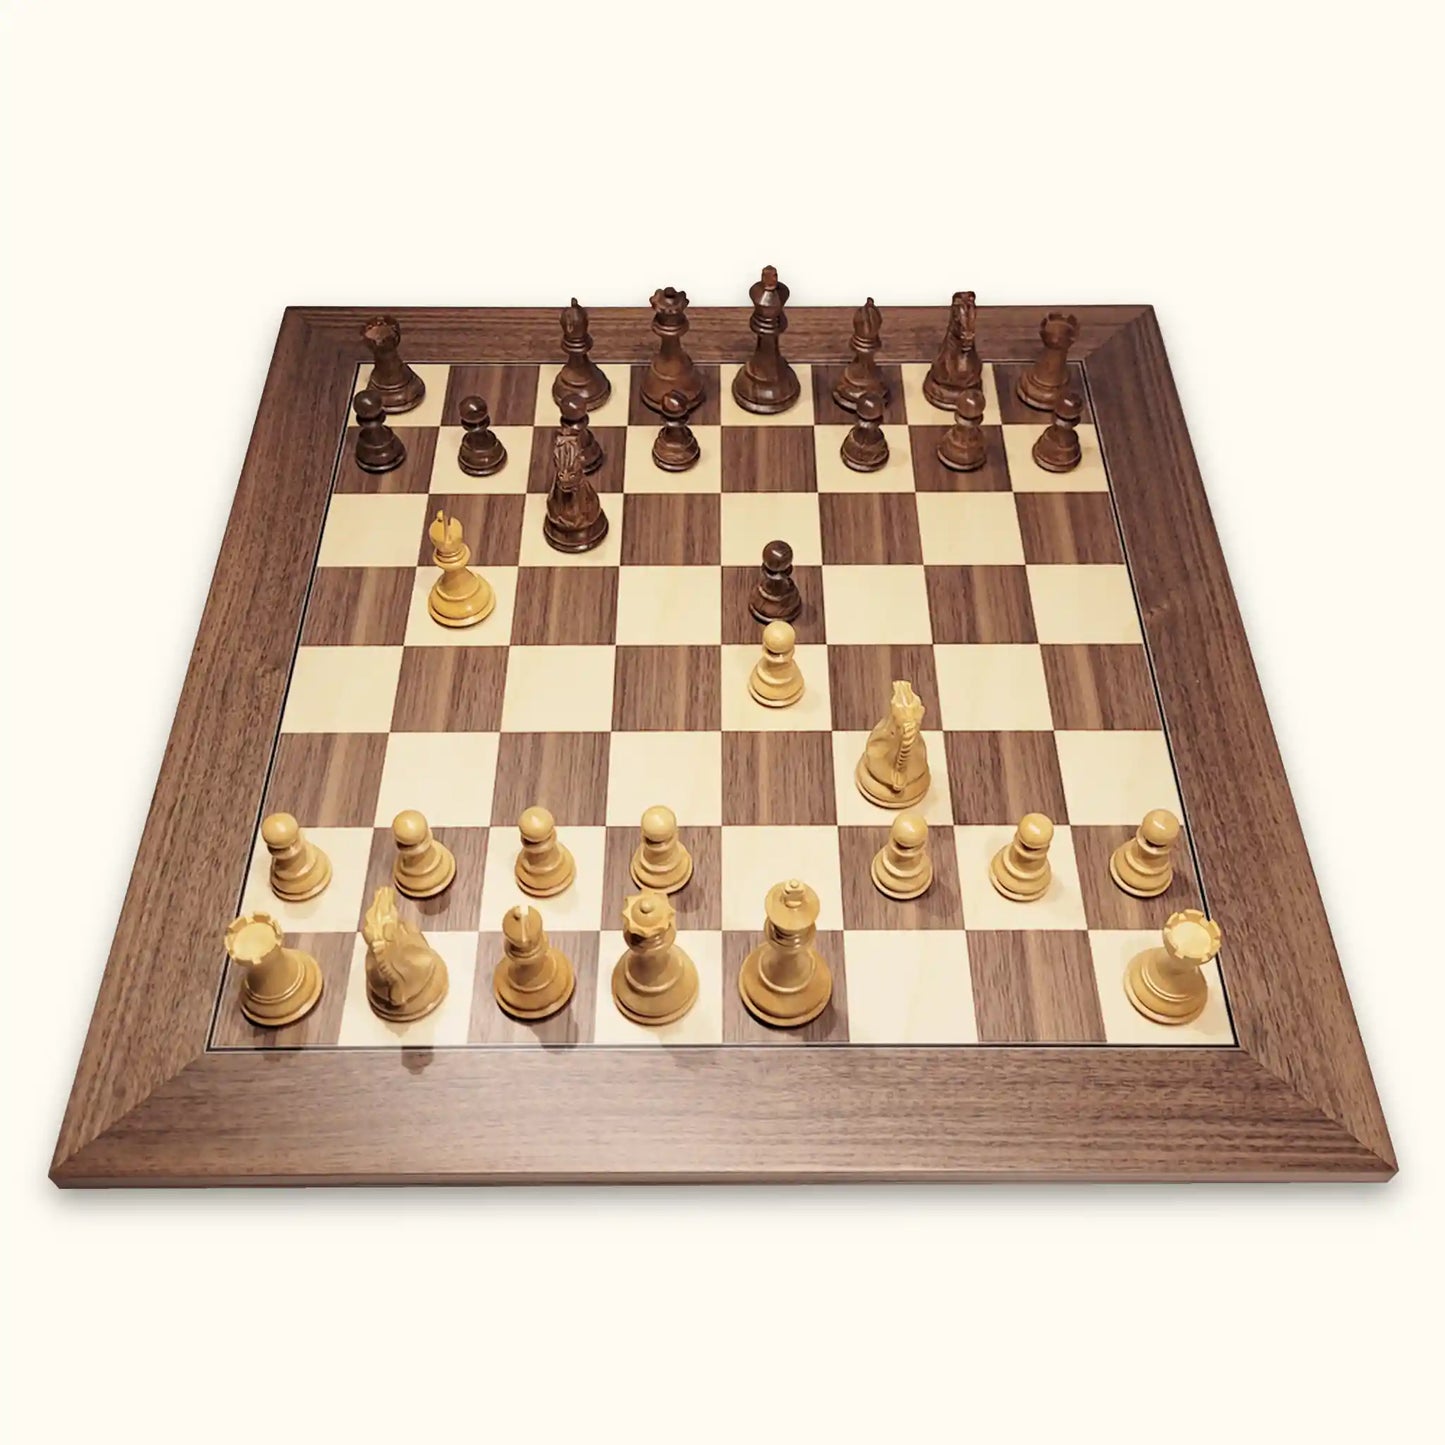 Chess set london at dawn with chess pieces supreme and chessboard walnut deluxe top view